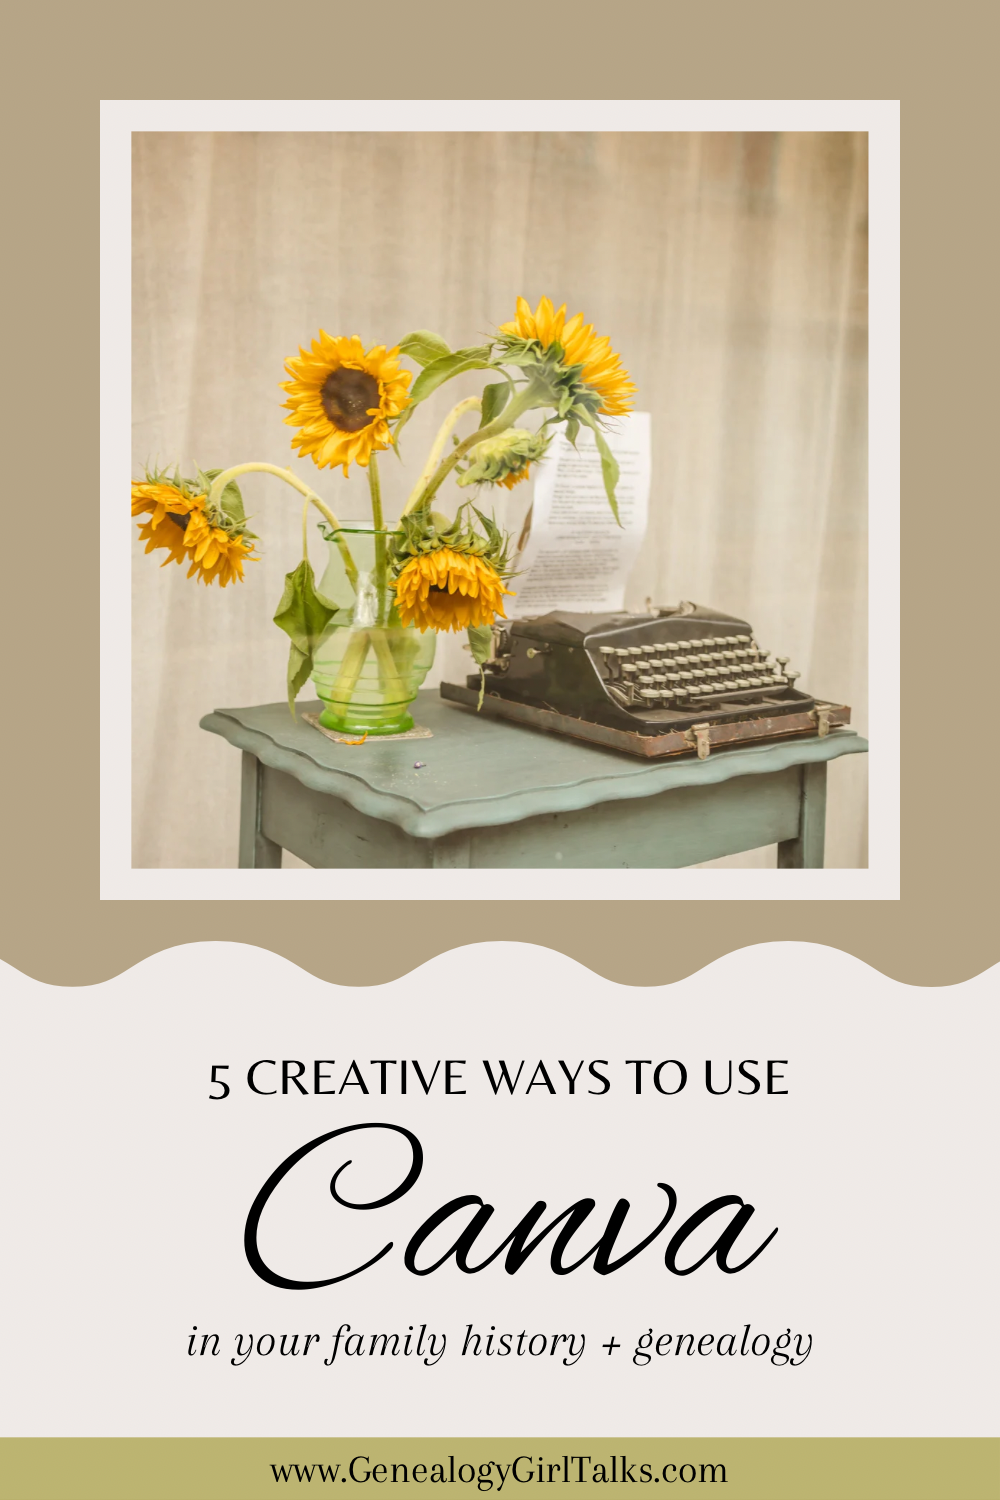 5 Creative Ways to use Canva in your Family History and Genealogy by Genealogy Girl Talks